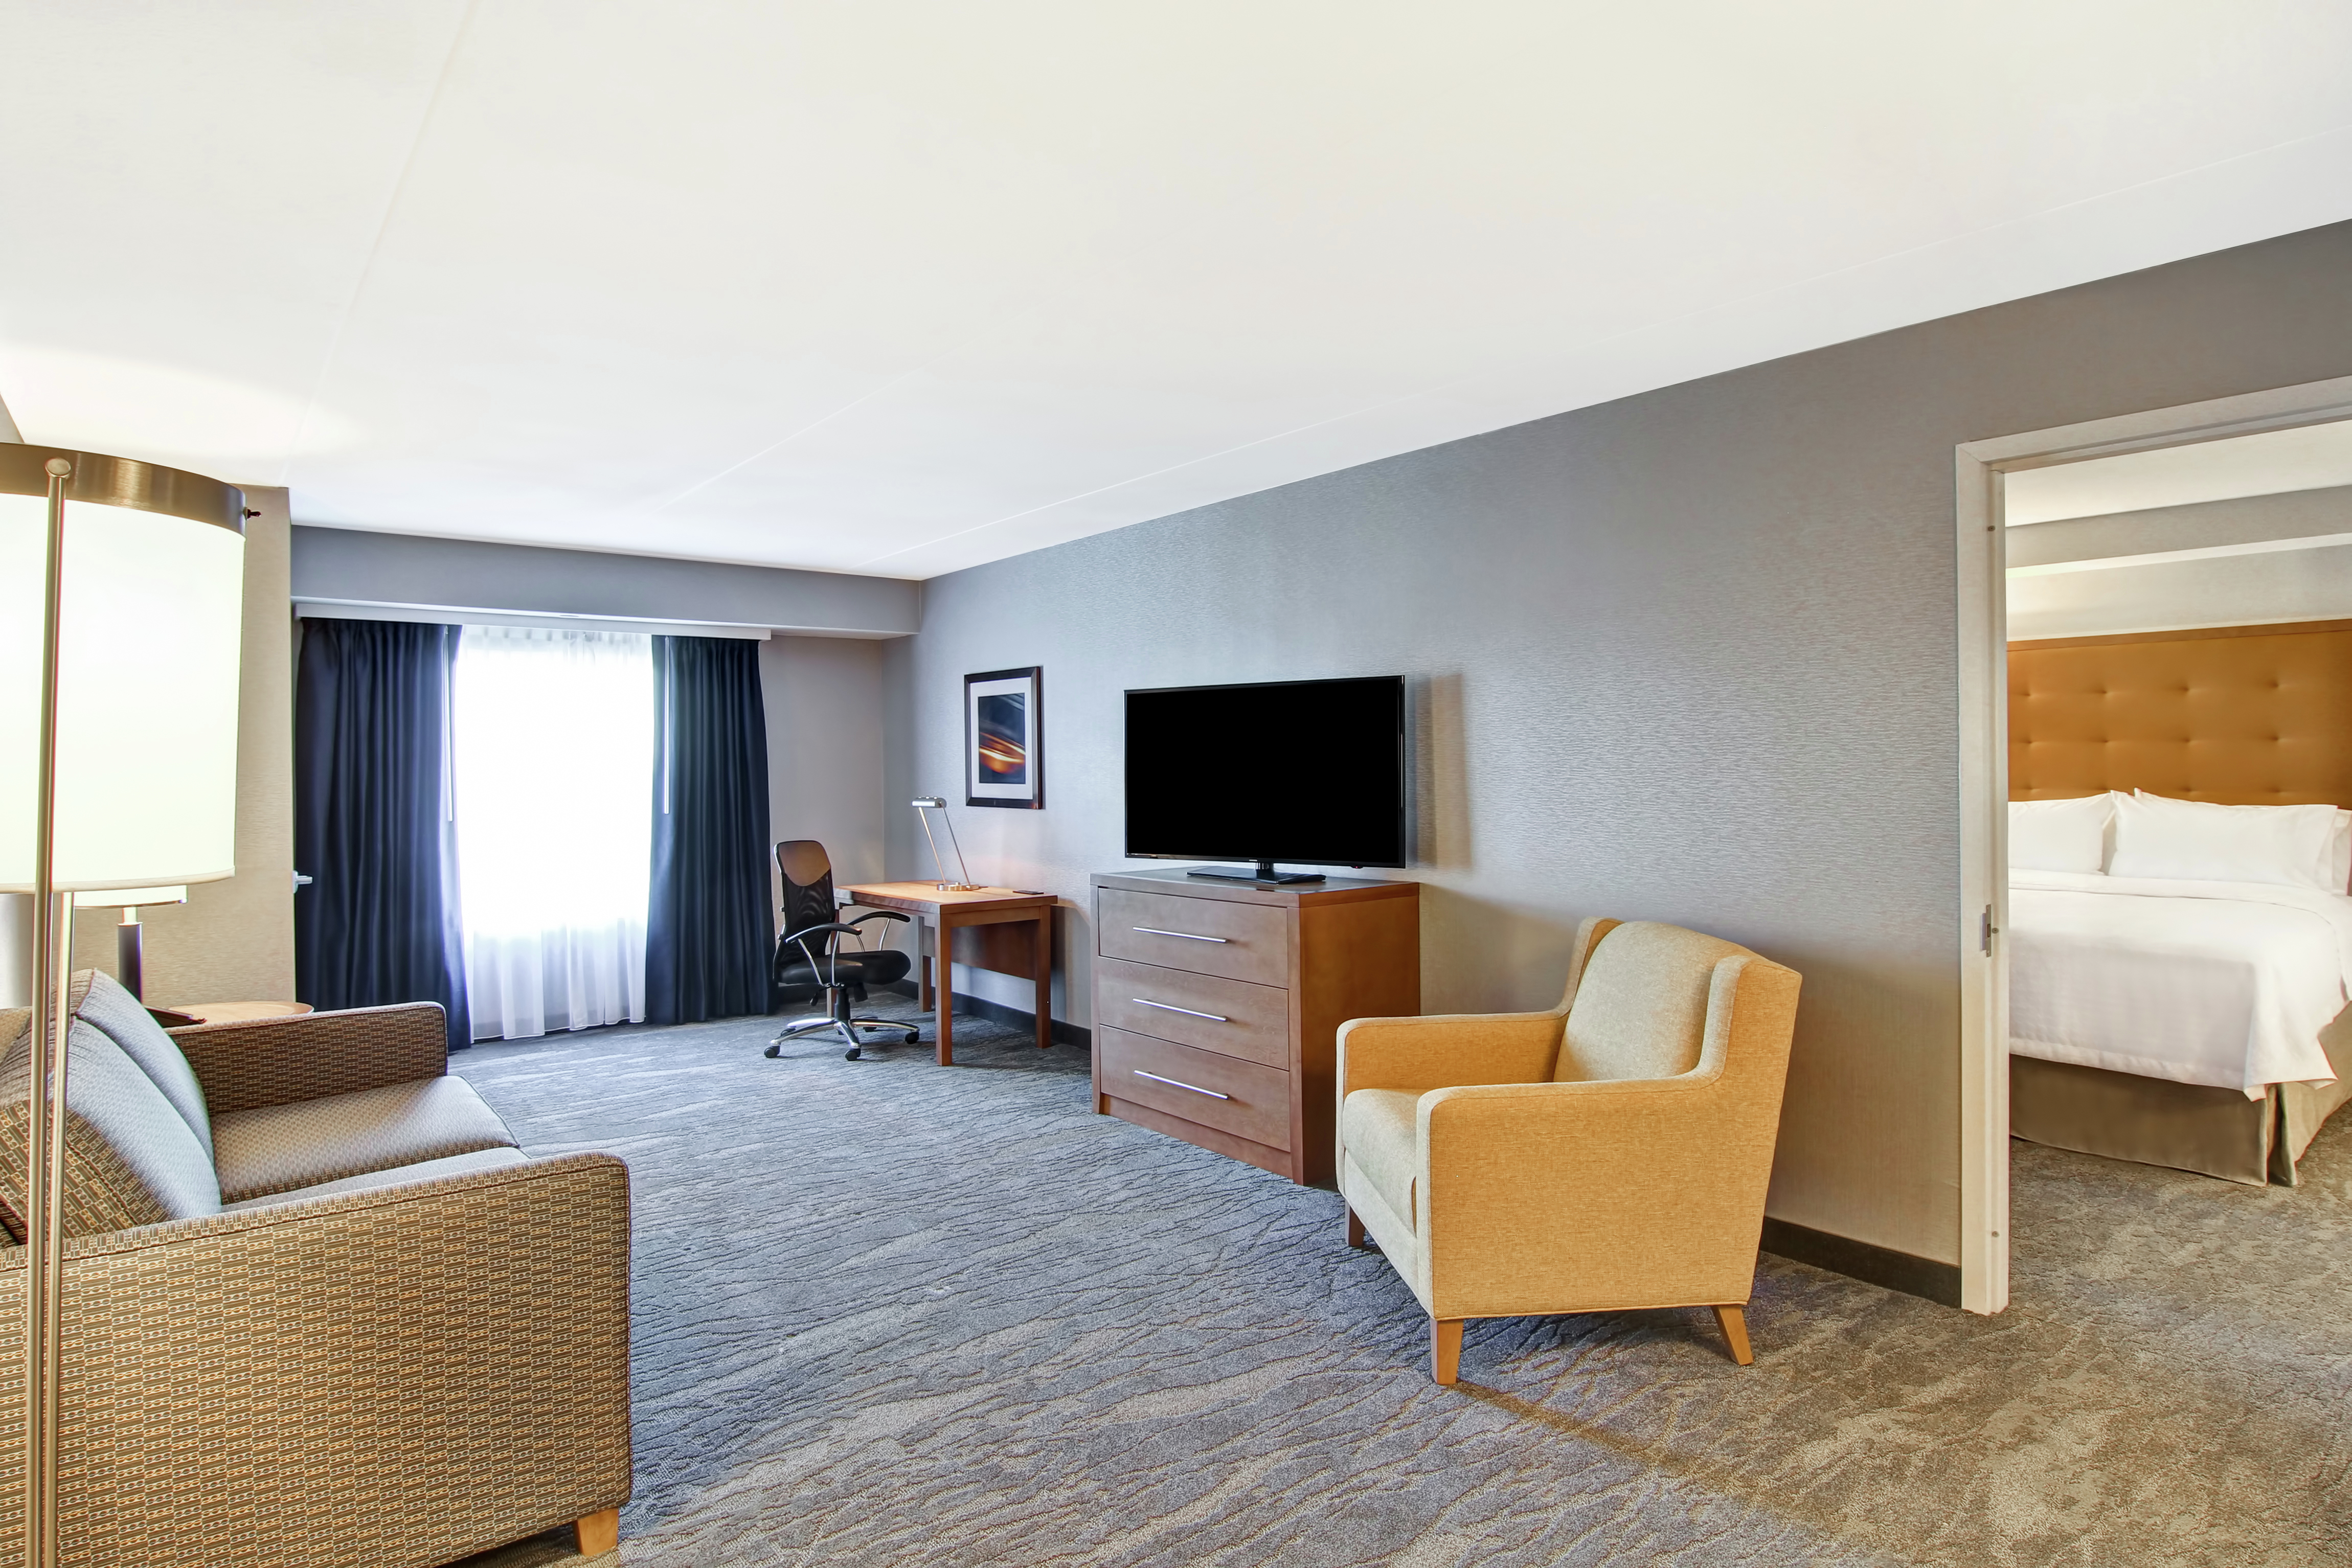 Suite living area with tv and comfortable seating